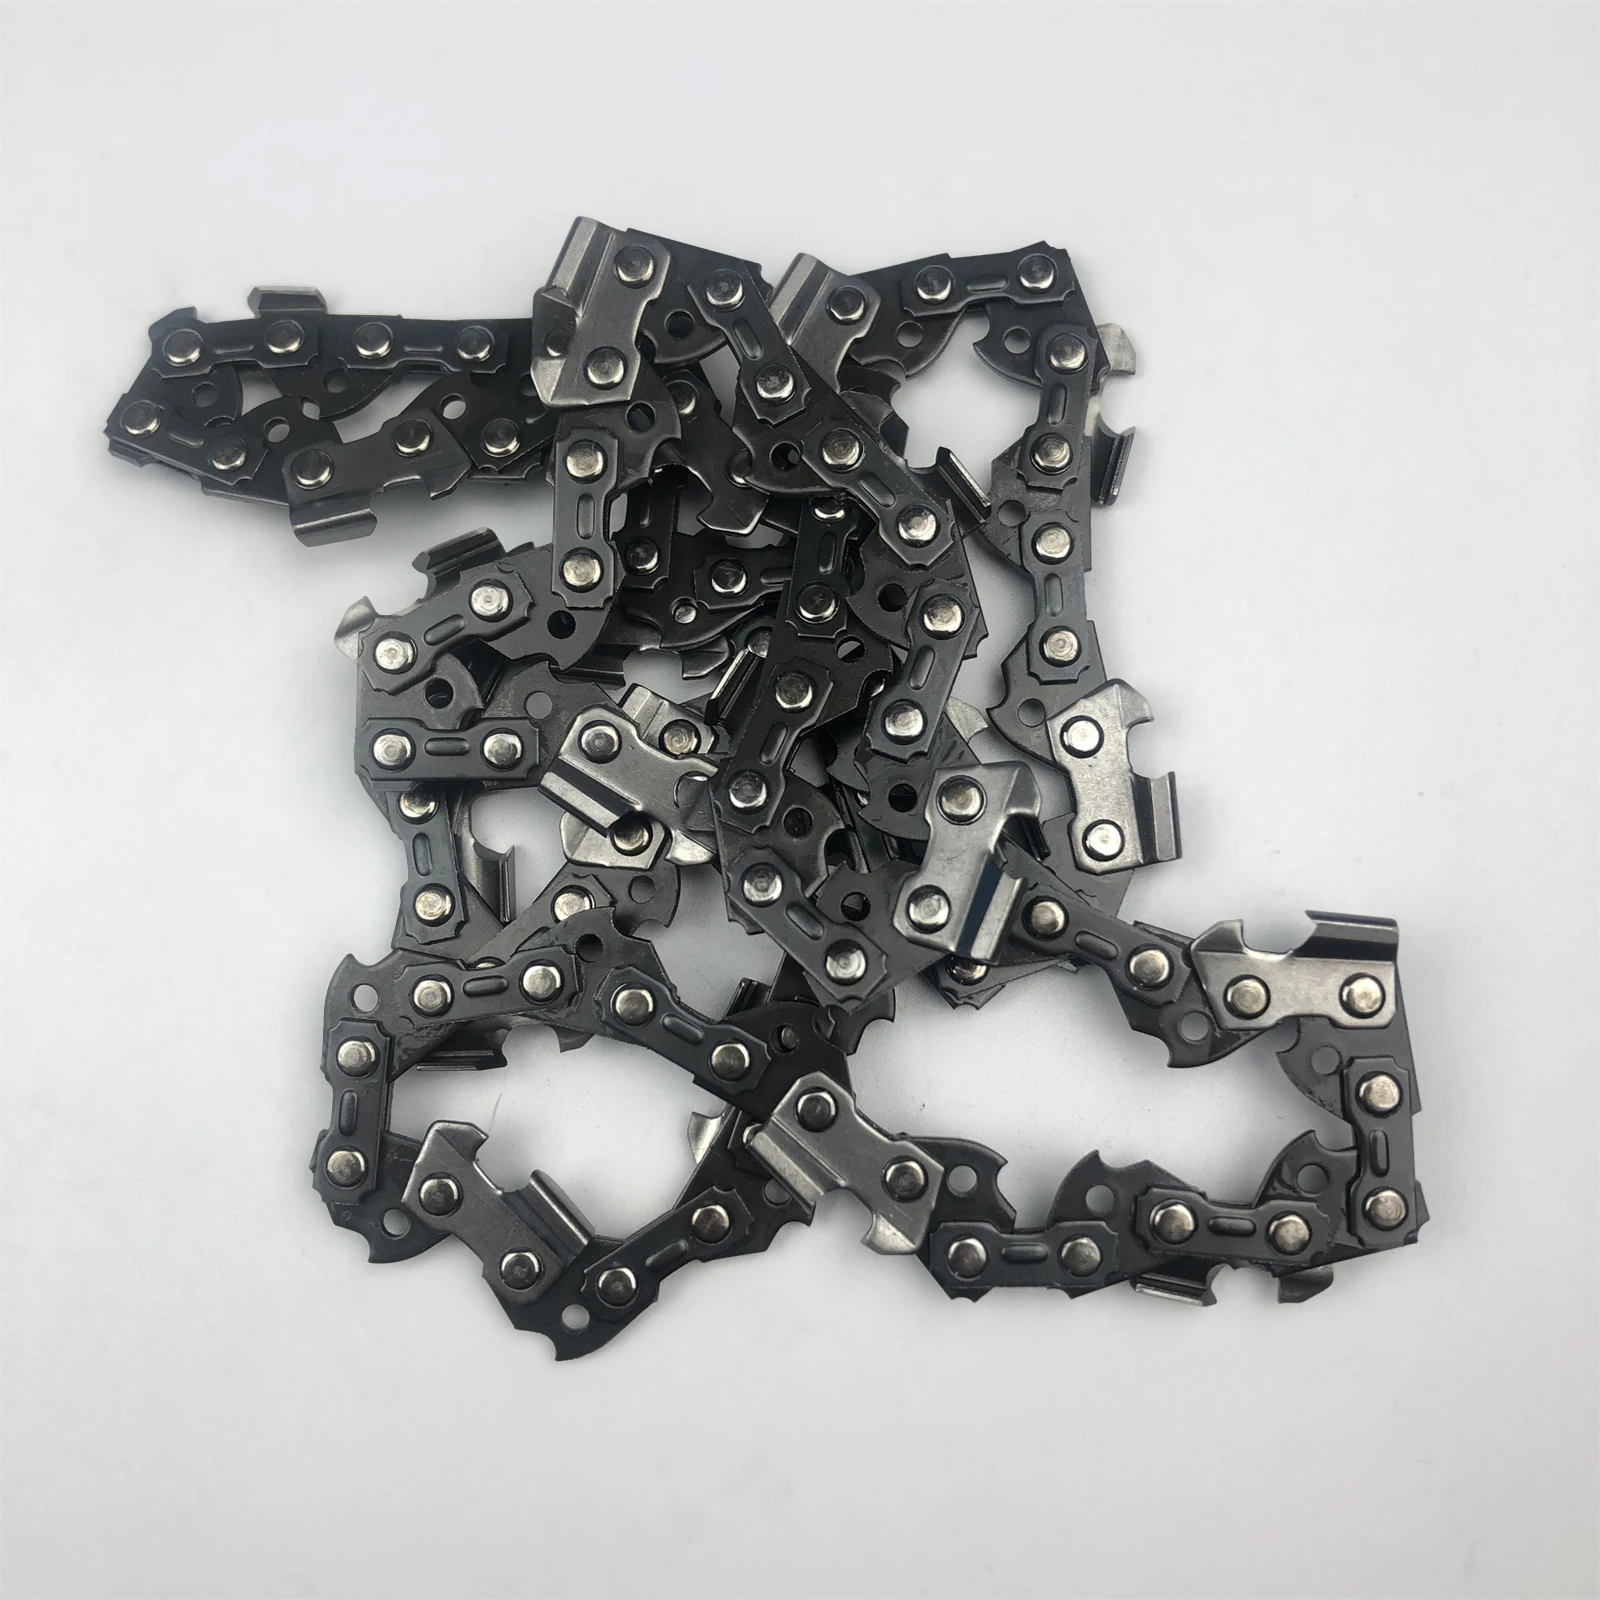 1PC 92 cm/36.22" Chainsaw Chain Fit For The Following STIHL Models MS170, MS180, MS181, MS190, MS191T, MS192T, MS200, MS200T